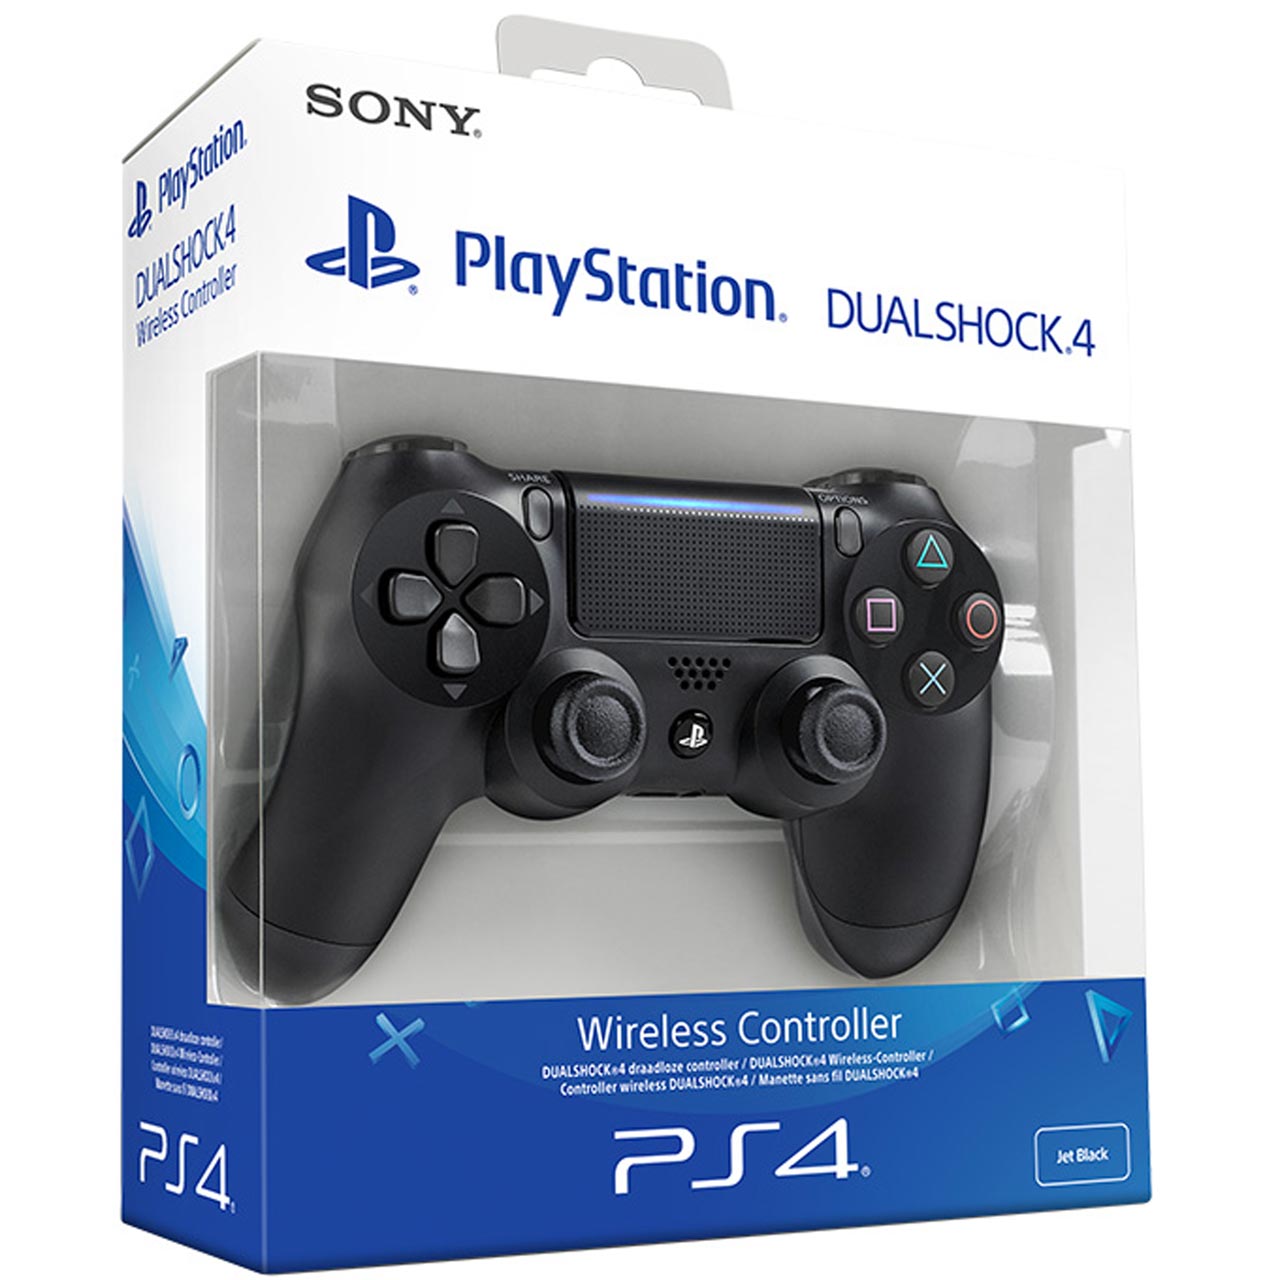 Dualshock 4 Wireless Controller for Playstation 4 PS4 – Black V2 (New)